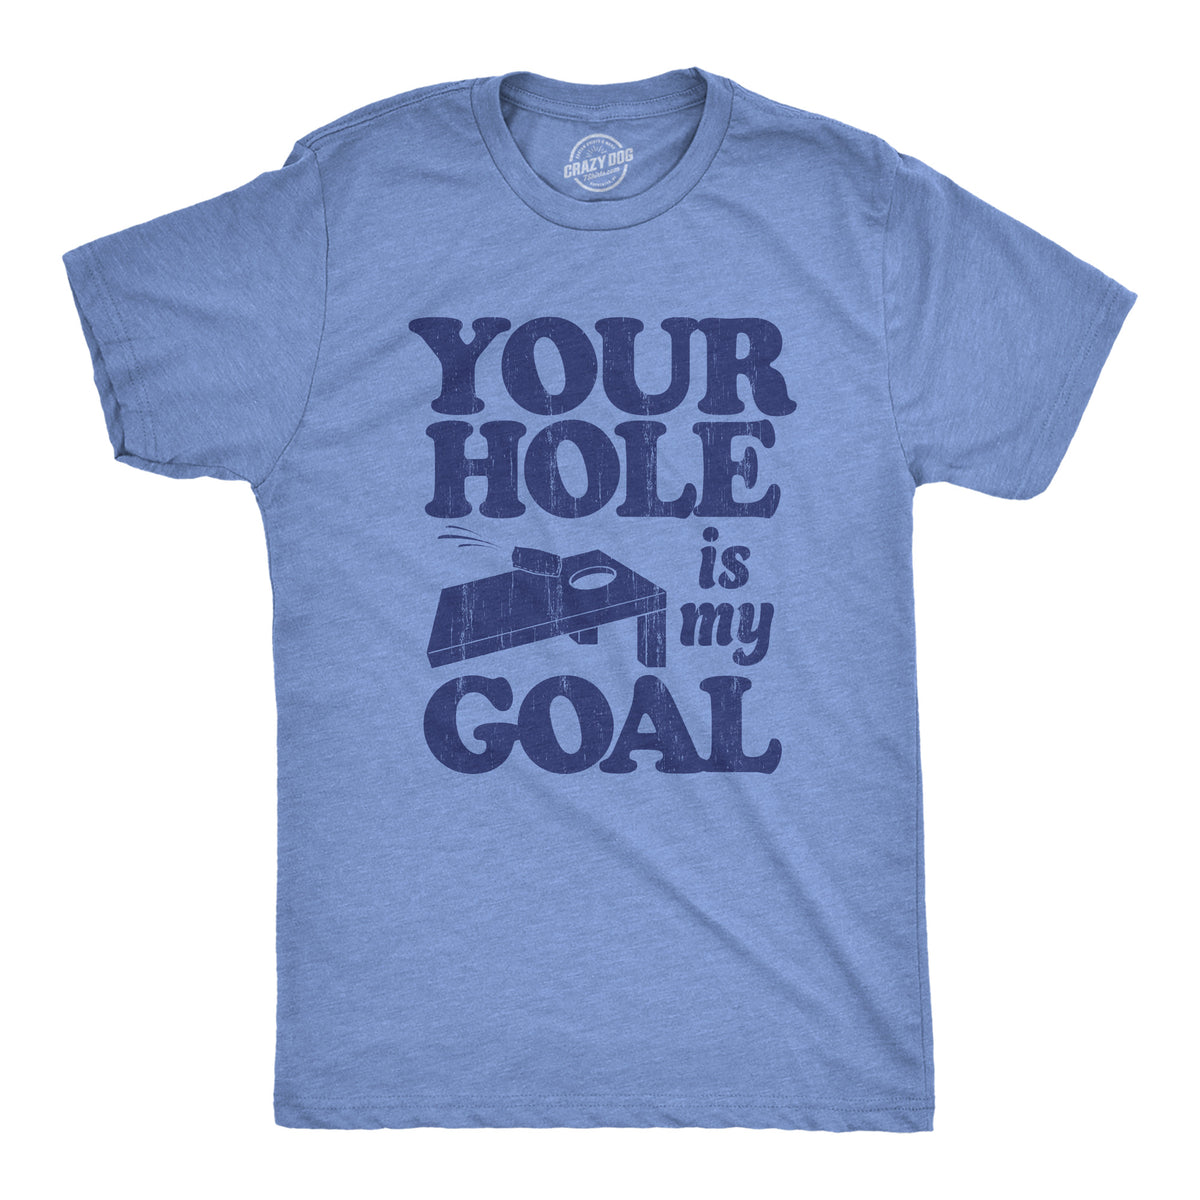 Funny Light Heather Blue - GOAL Your Hole Is My Goal Mens T Shirt Nerdy Sarcastic Tee